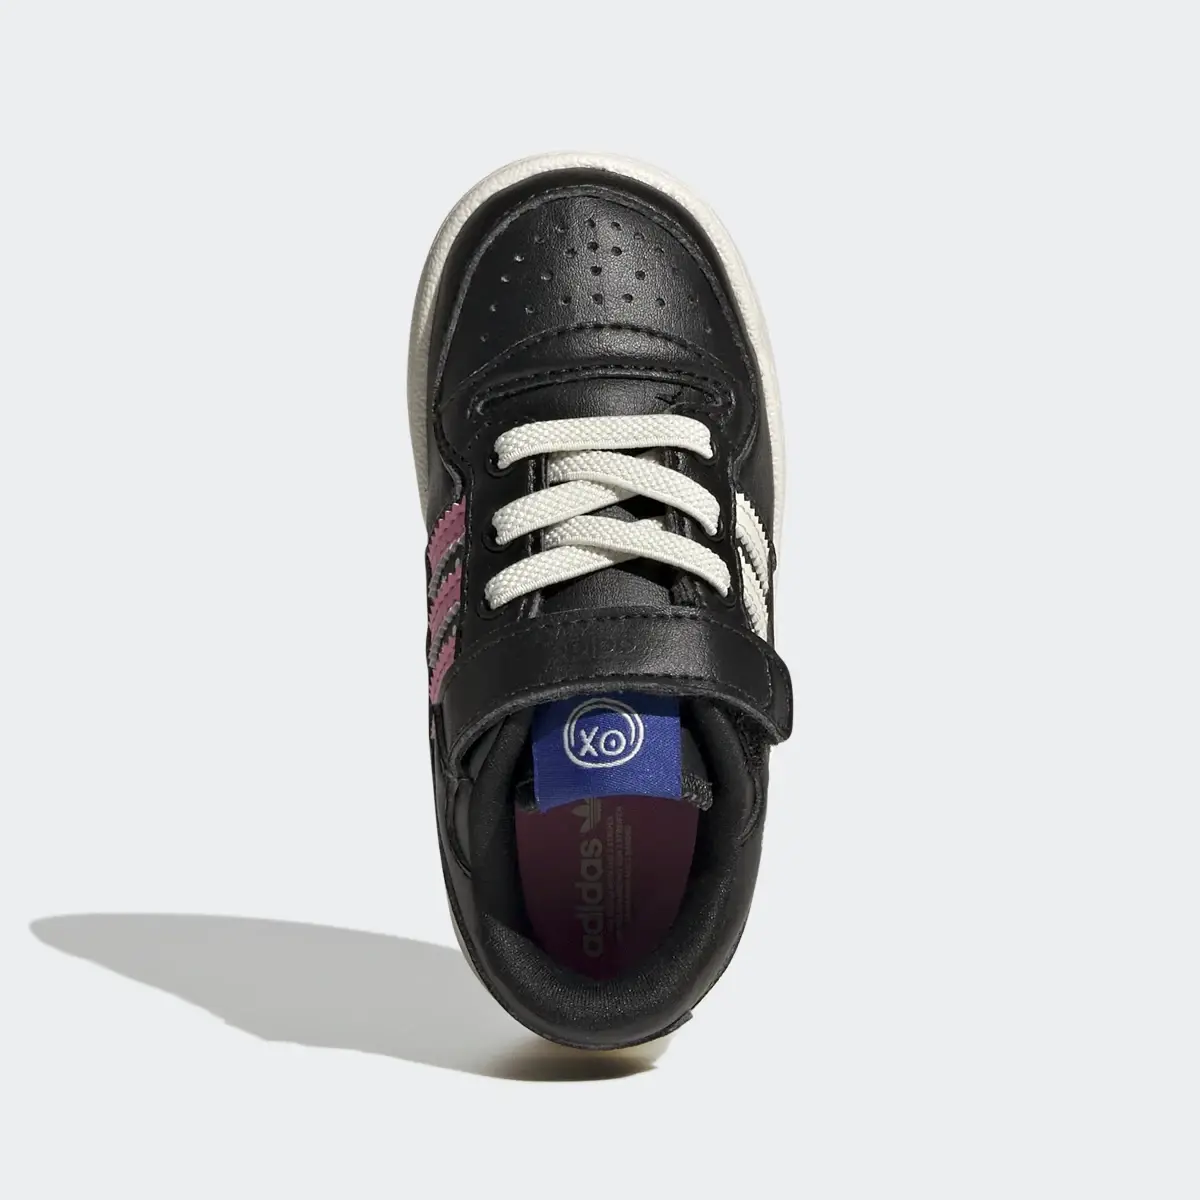 Adidas Forum Low Shoes. 3